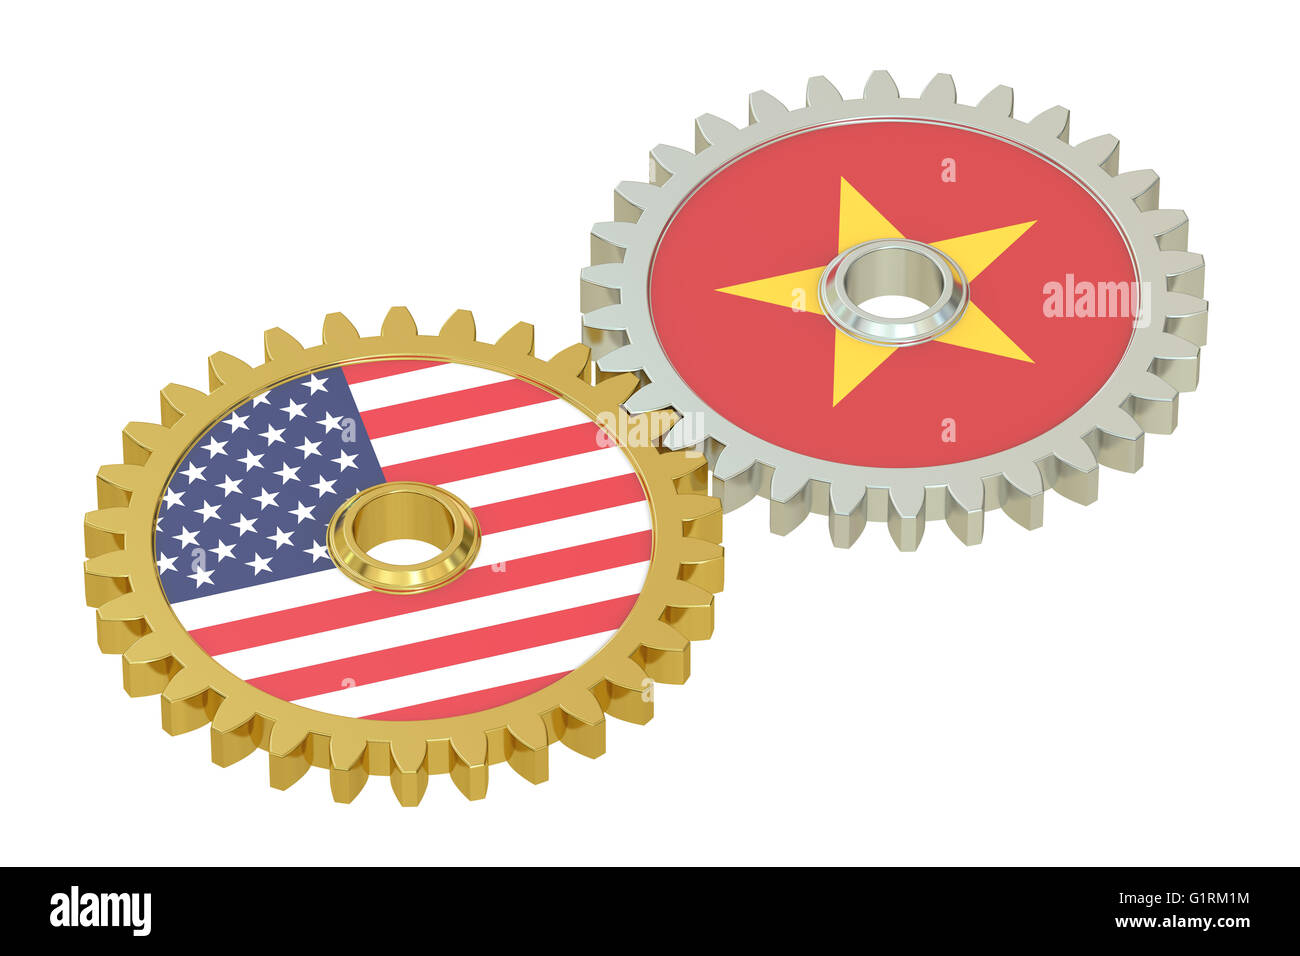 Vietnam and USA  relations, 3D rendering isolated on white background Stock Photo